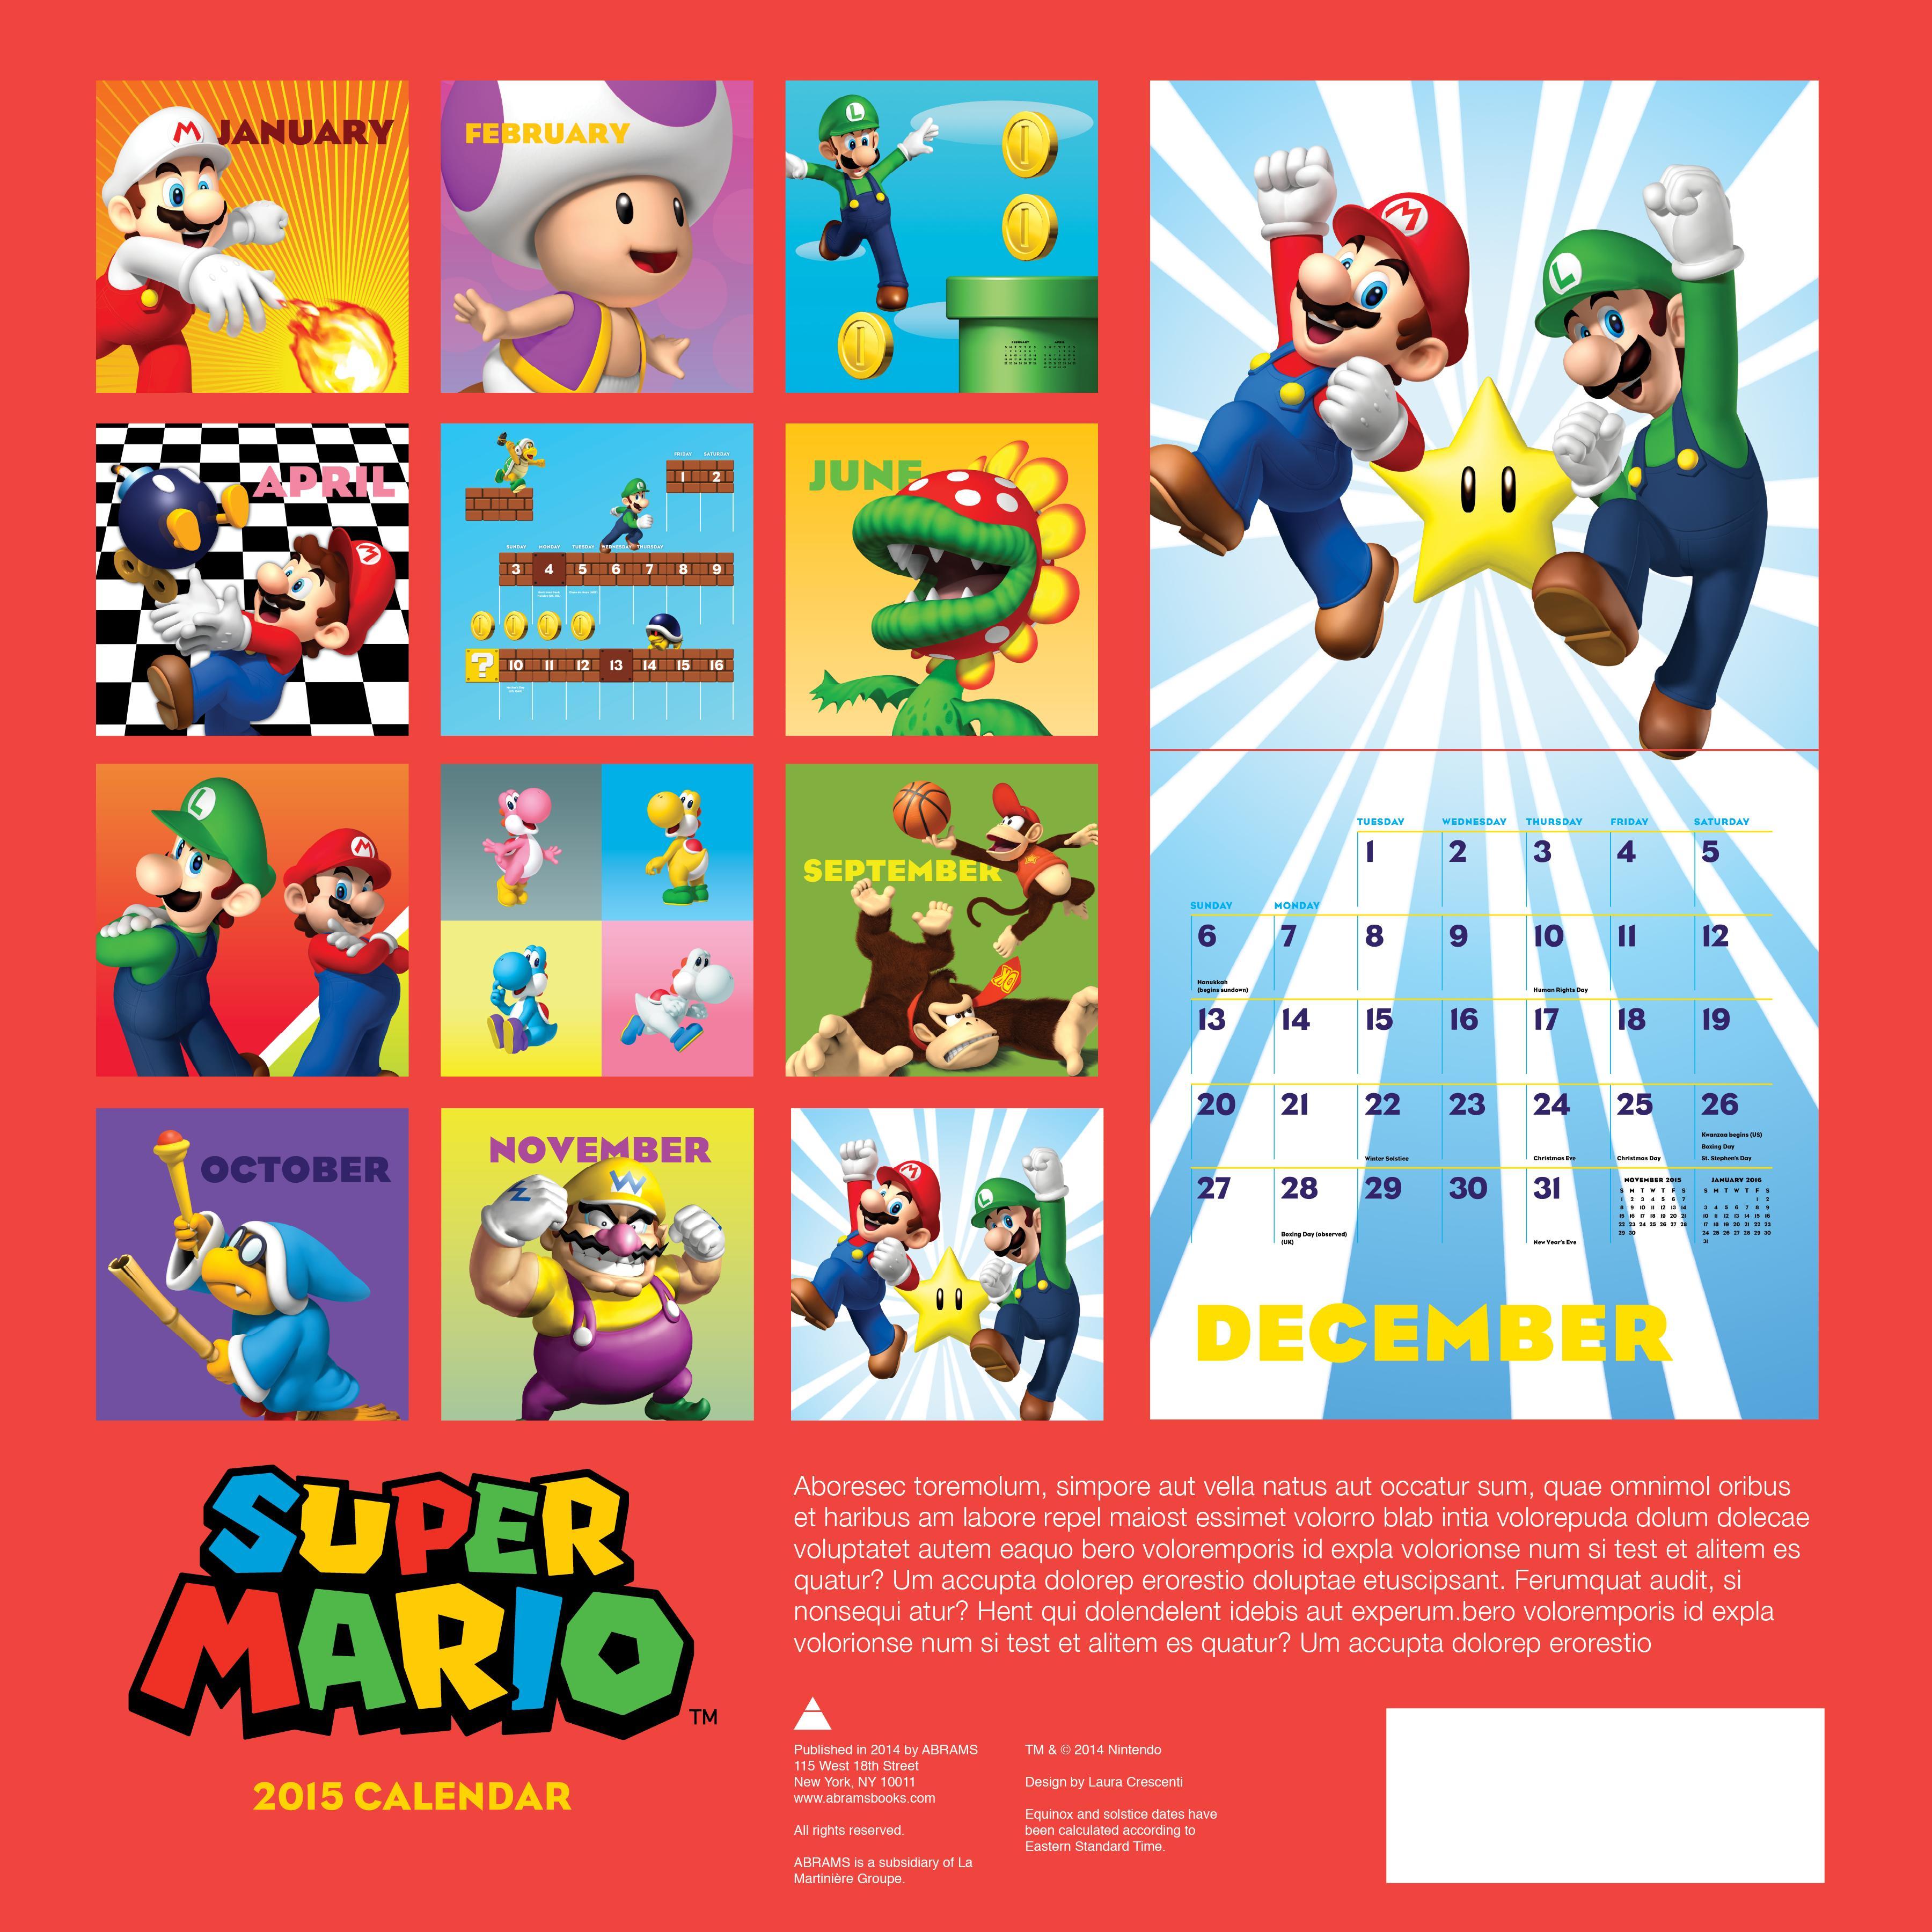 Fan Fiction competition write a Super Mario story to win a 2015 Super